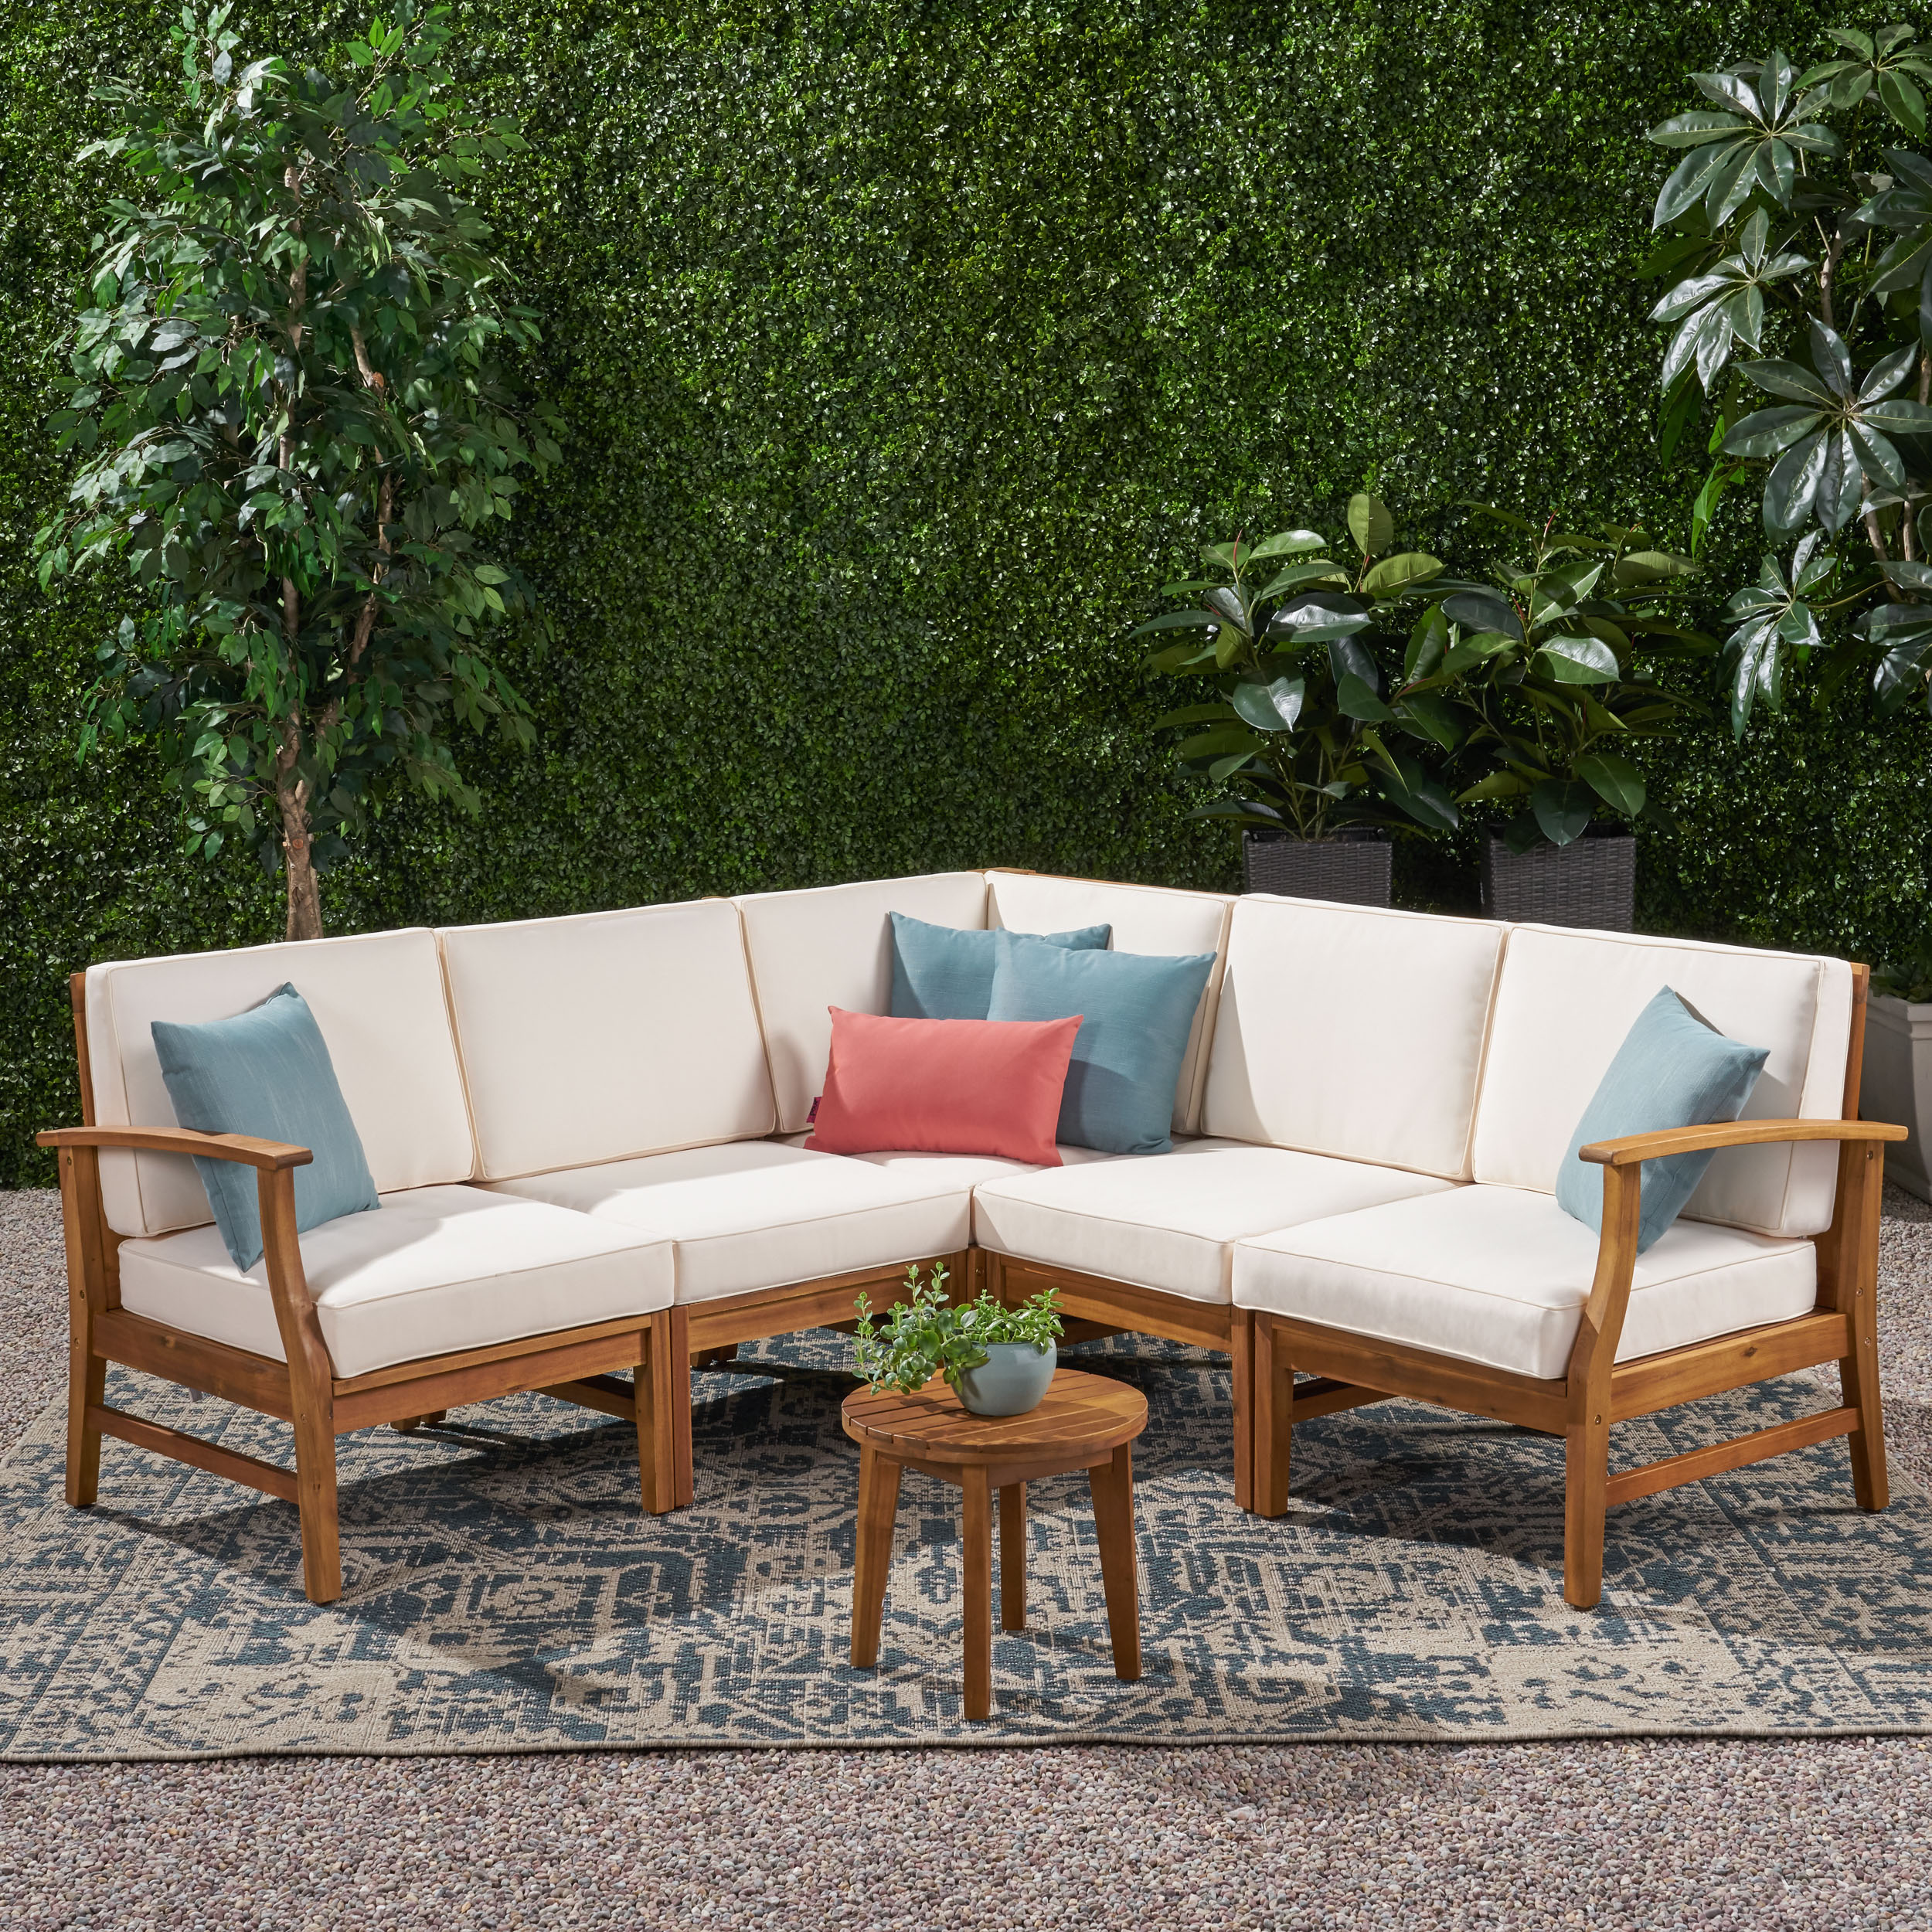 Hermosa Outdoor 5 Piece Chat Set with Cushions (No Coffee Table), Teak Finish, Cream - image 1 of 8